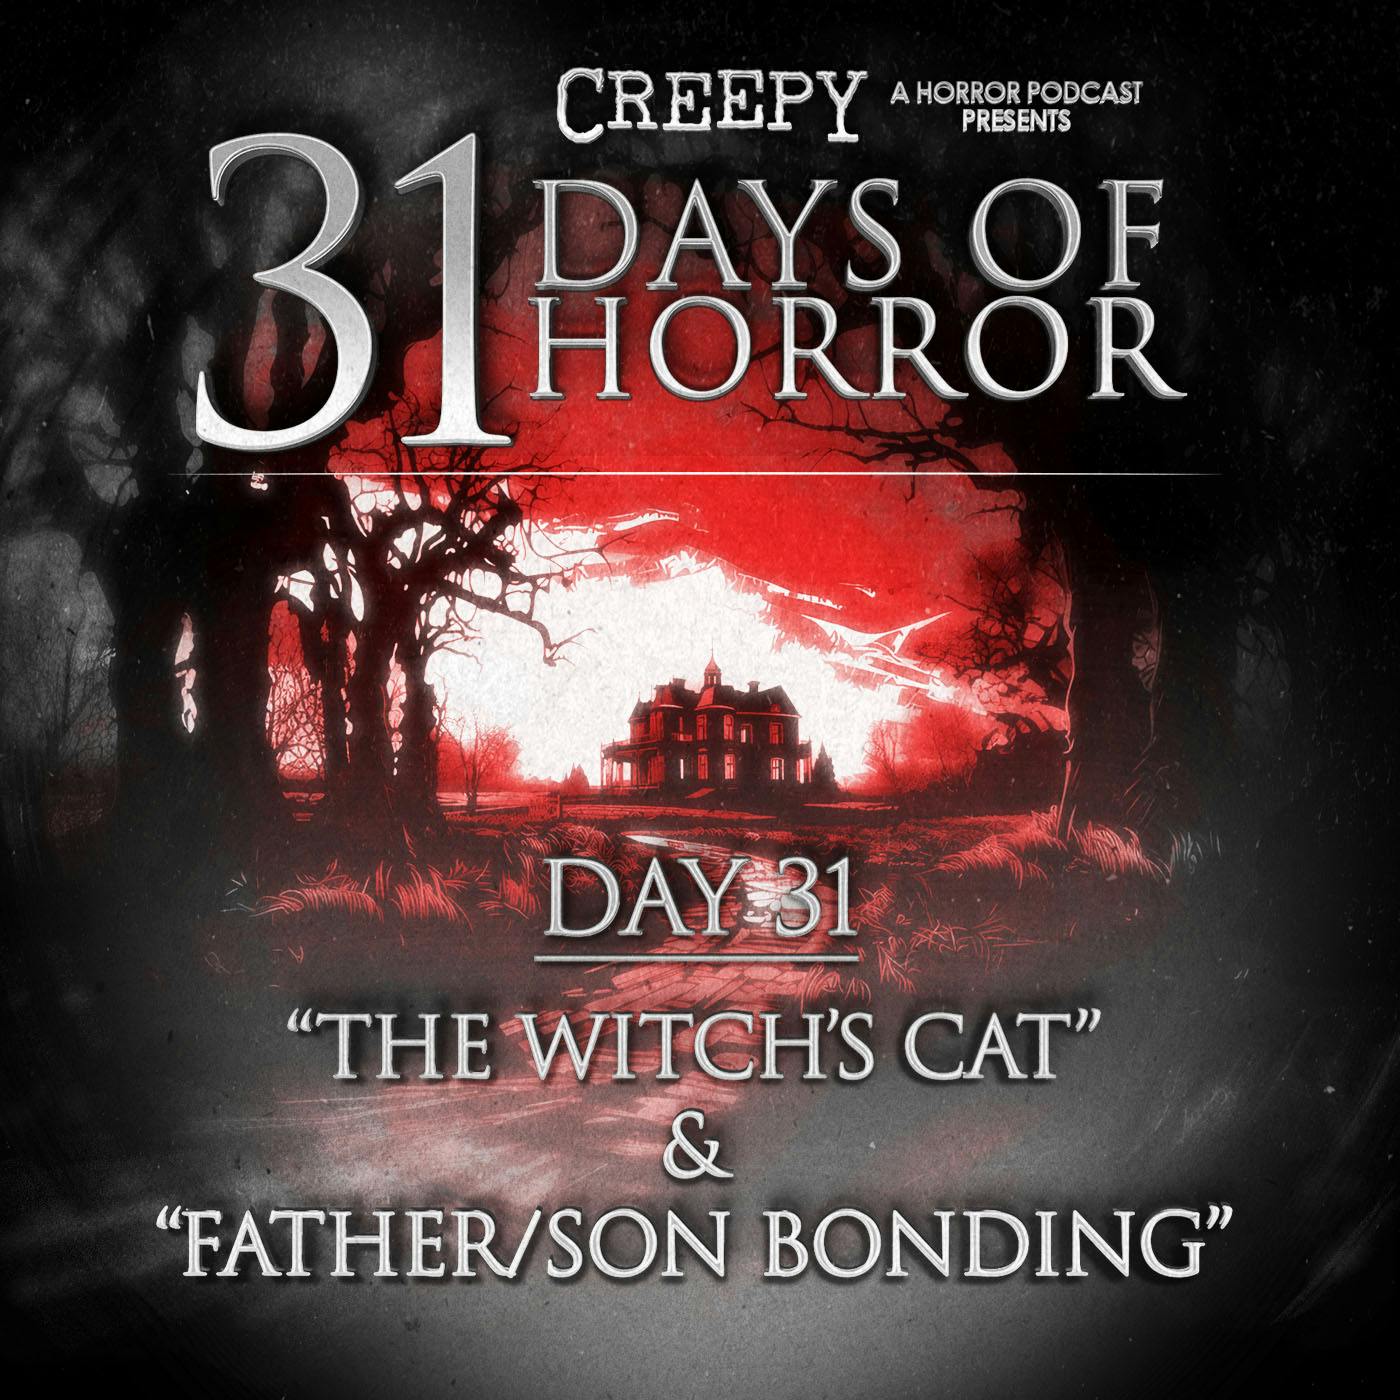 Day 31 - The Witch's Cat & Father/Son Bonding